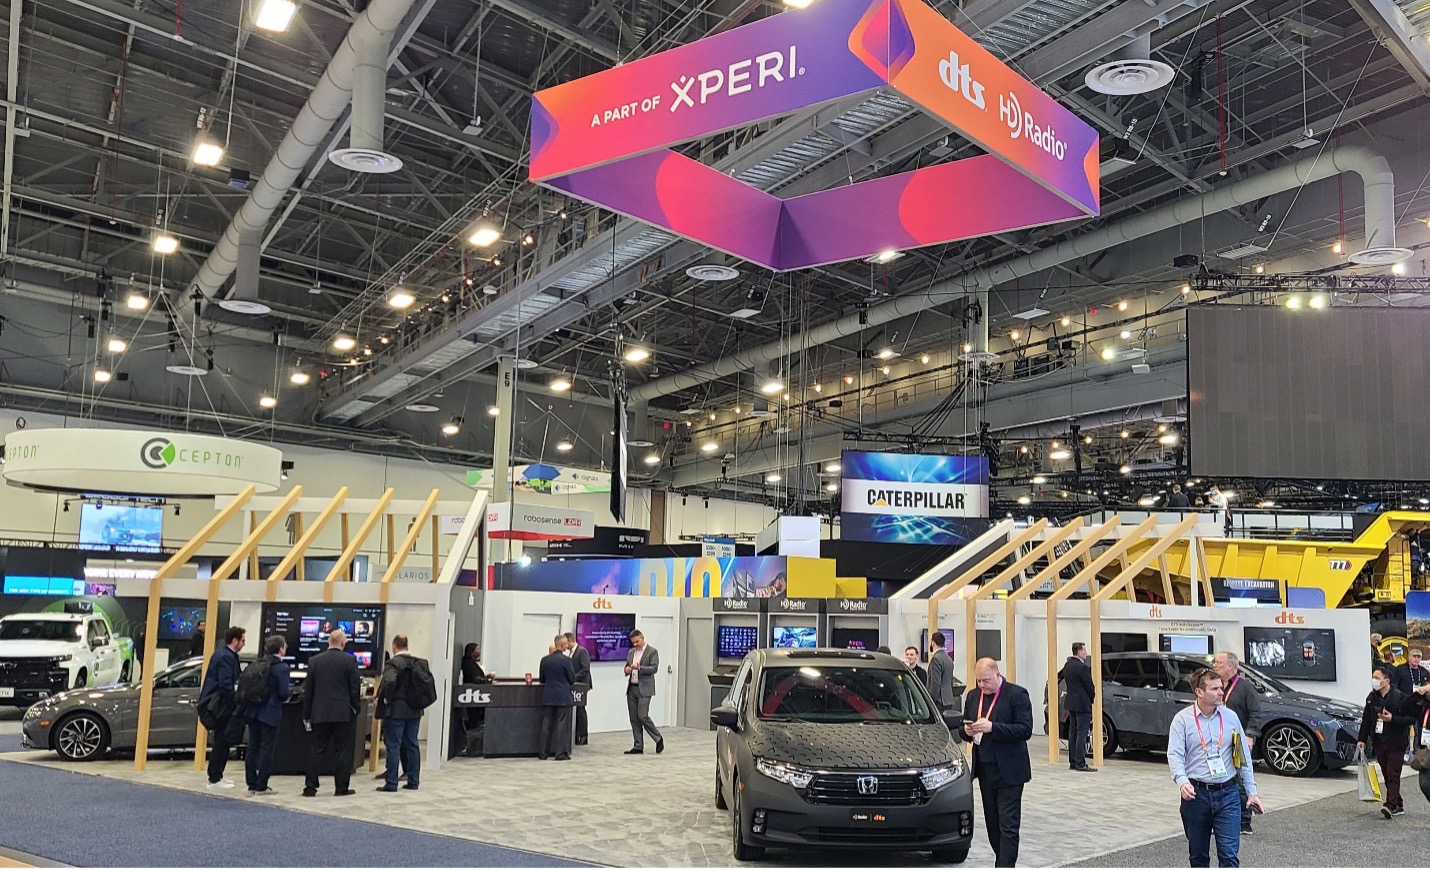 Xperi’s exhibit in the West Hall of the Las Vegas Convention Center at CES 2023.